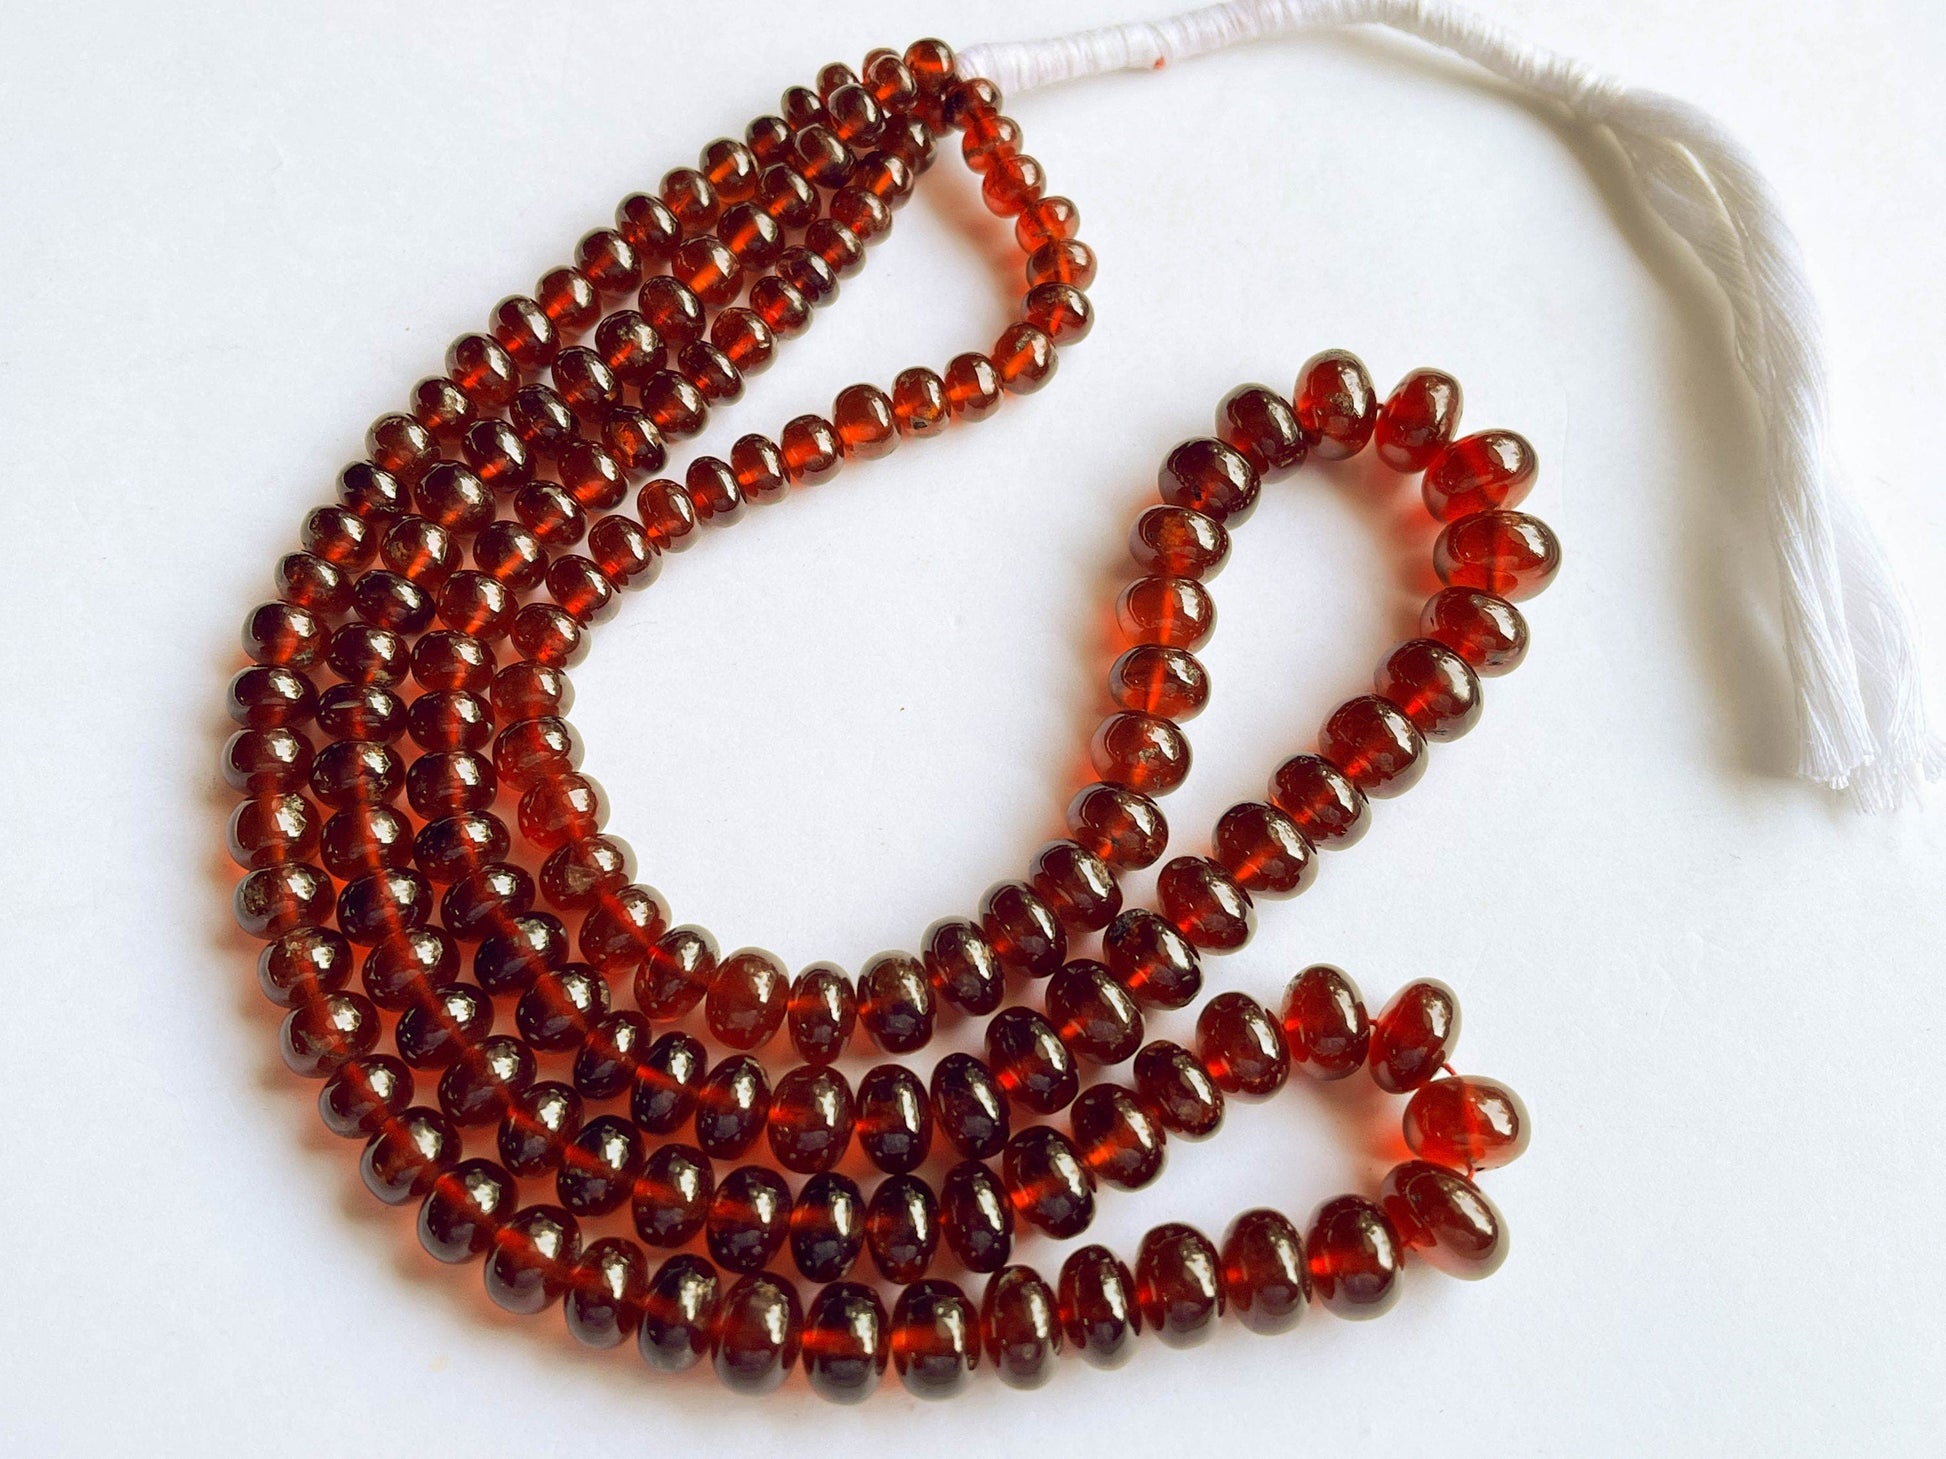 16 Inch Hessonite Smooth Rondelle Beads, Hessonite Beads, Hessonite Rondelle Beads, Hessonite Beads Beadsforyourjewelry